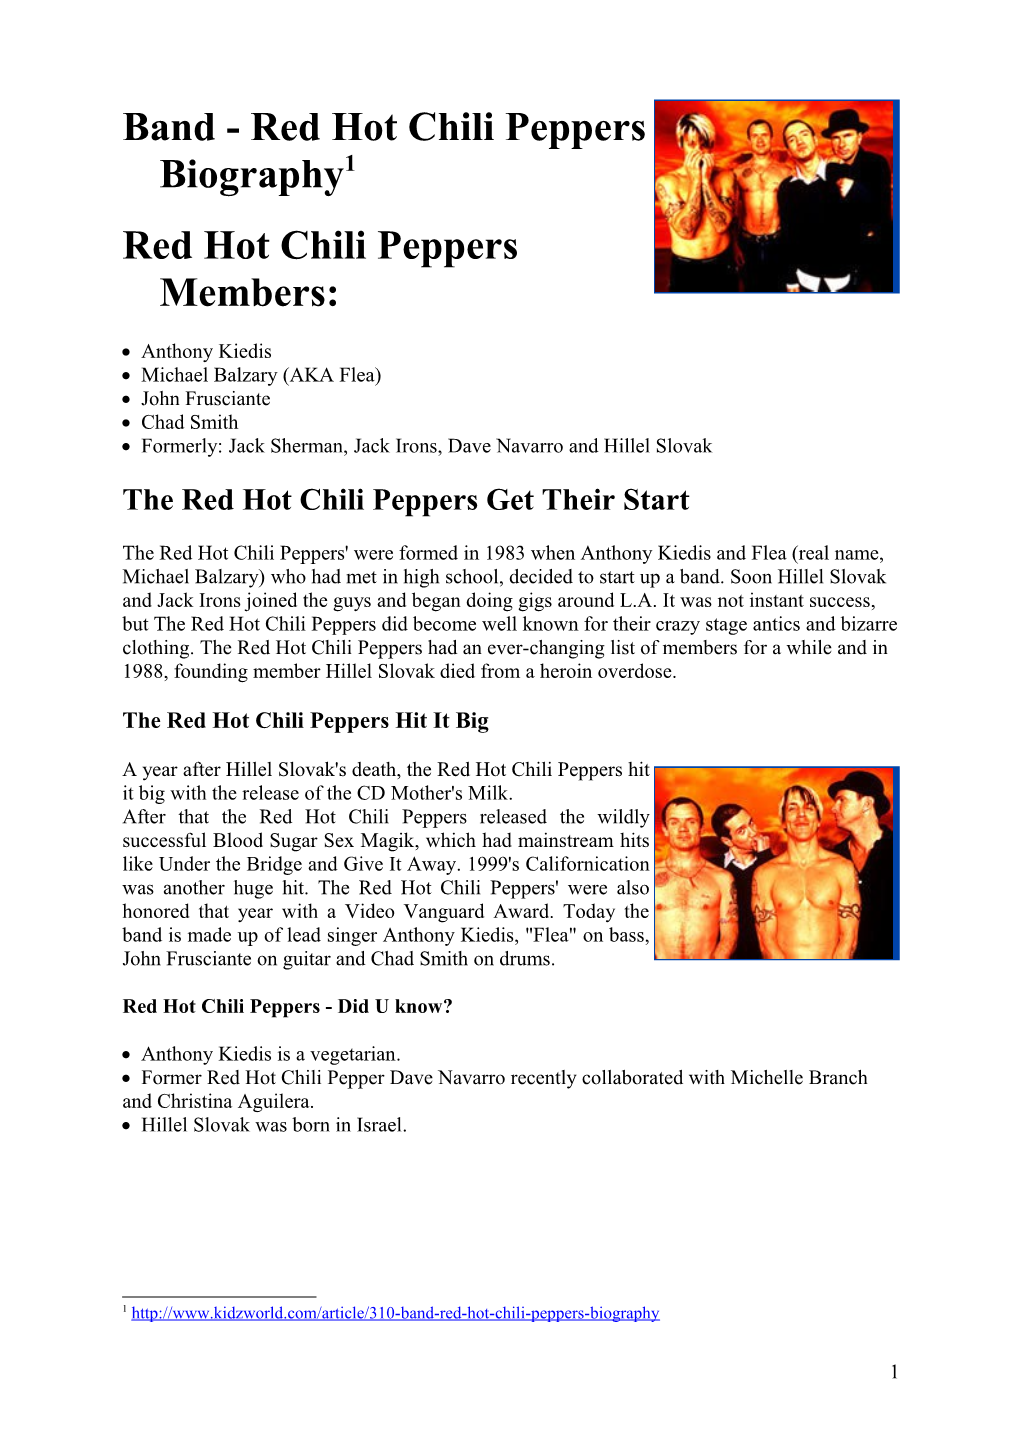 Band - Red Hot Chili Peppers Biography